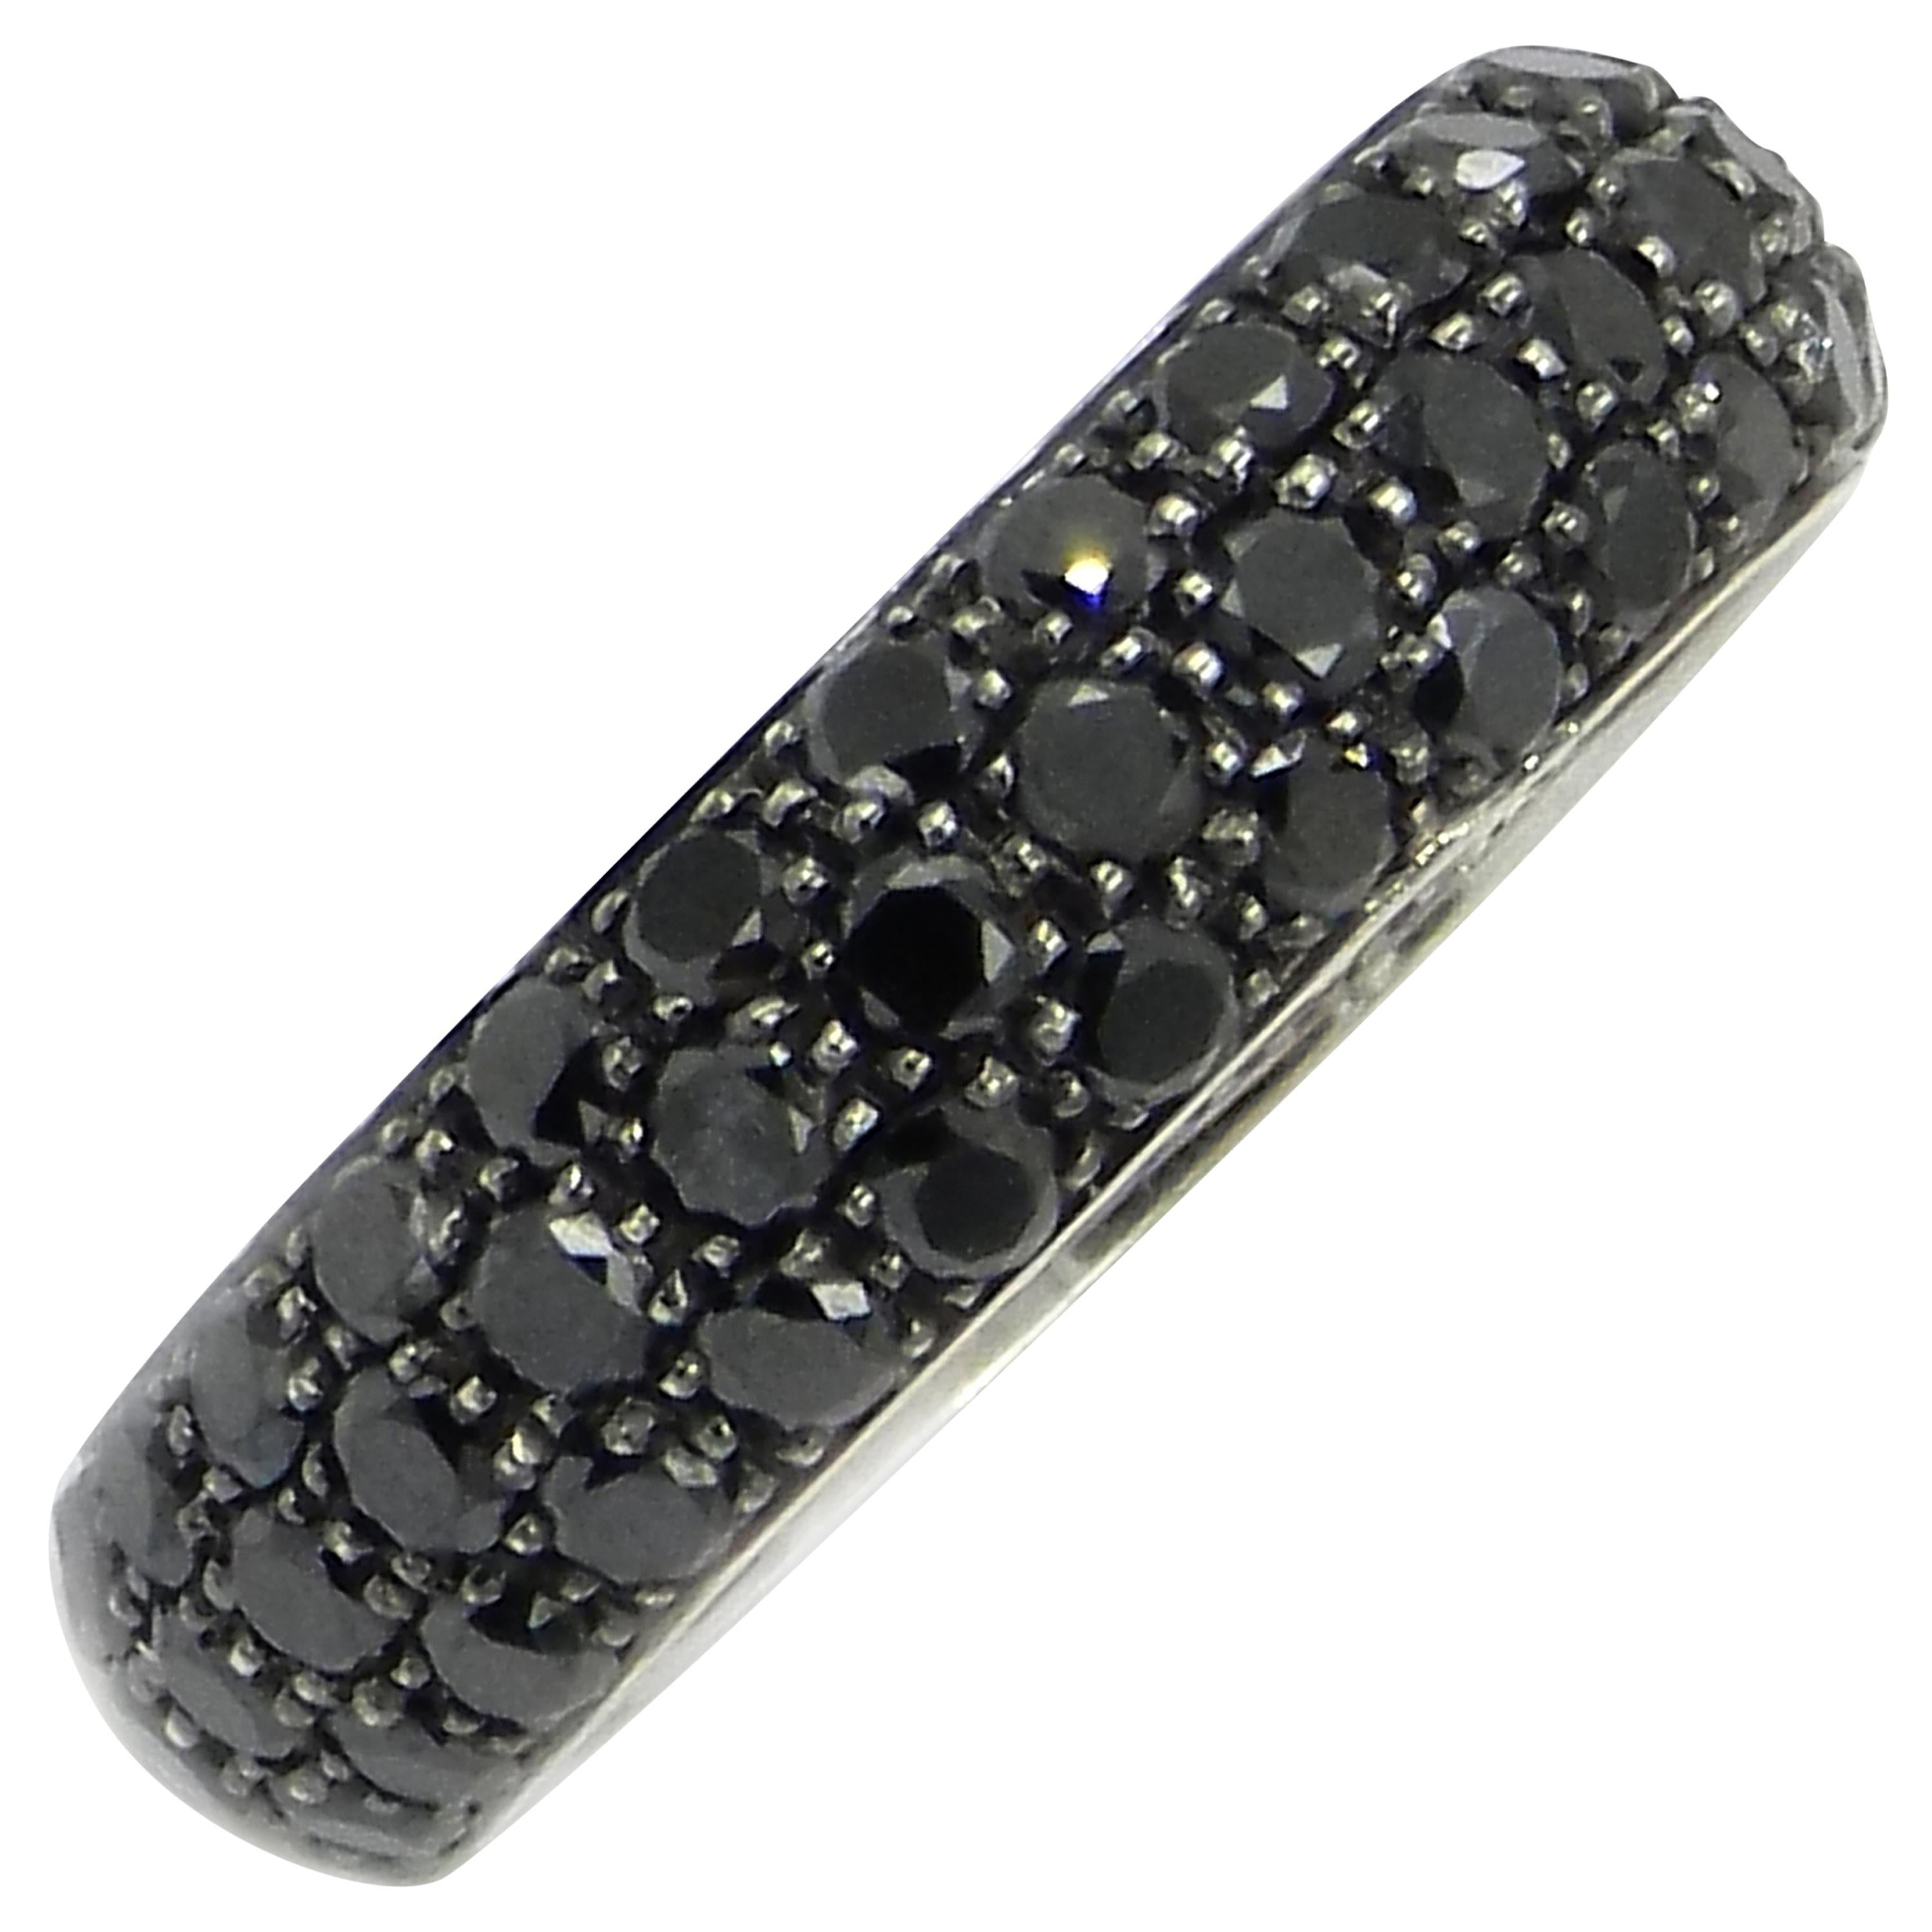 A beautiful piece of jewelry from Garavelli,  an Eternity ring. 
Brand: Garavelli
Material: 18 Karat White Gold
Diamonds: Black Diamonds in Pavé Band Eternity Style
Total Carat Weight: 2.88
Setting: Three rows of black diamonds
Ring Style: Eternity